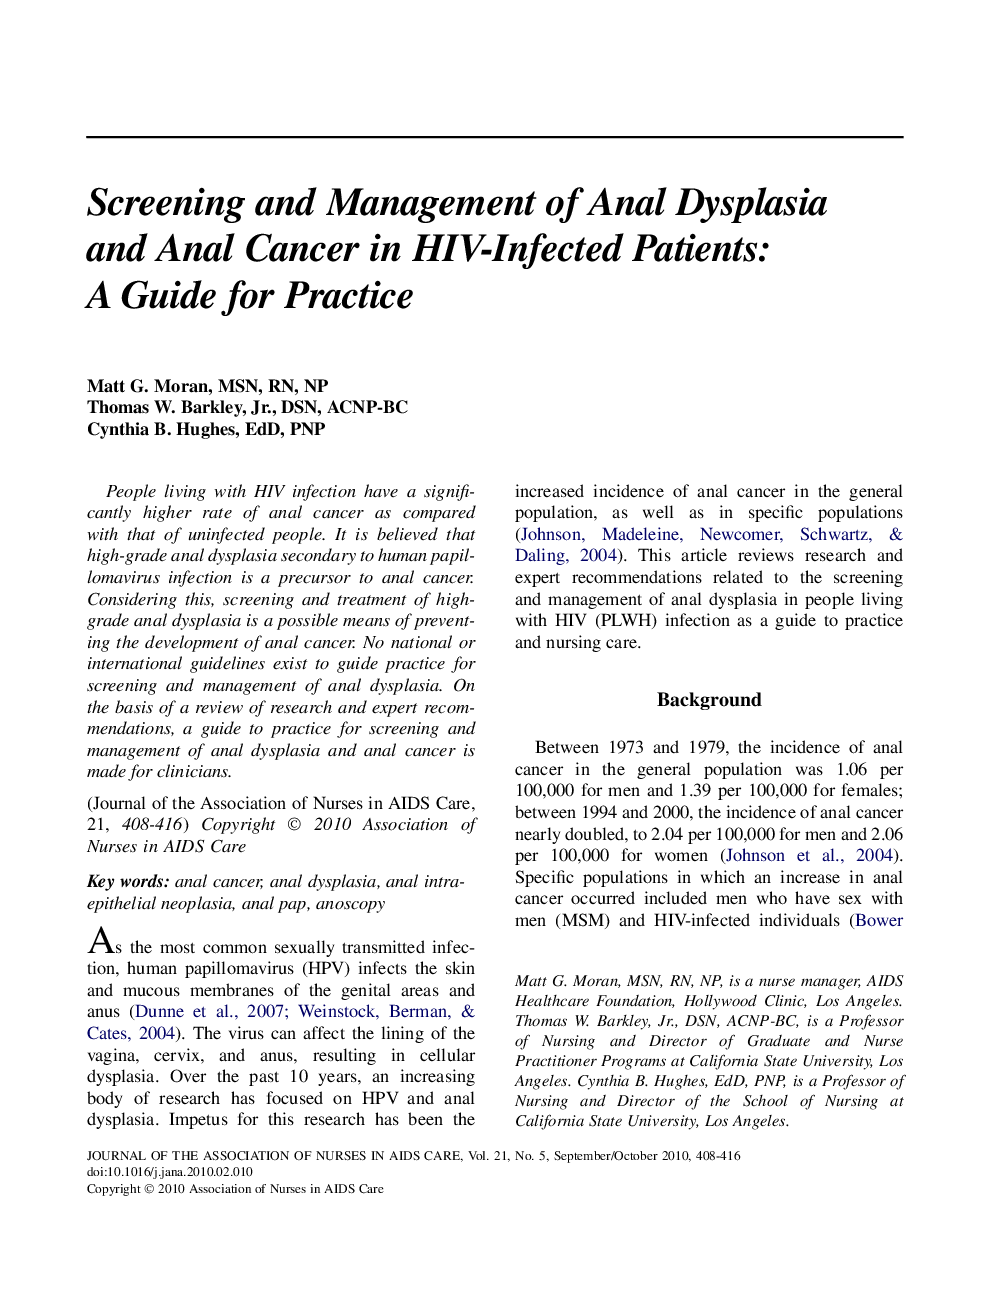 Screening and Management of Anal Dysplasia and Anal Cancer in HIV-Infected Patients: A Guide for Practice